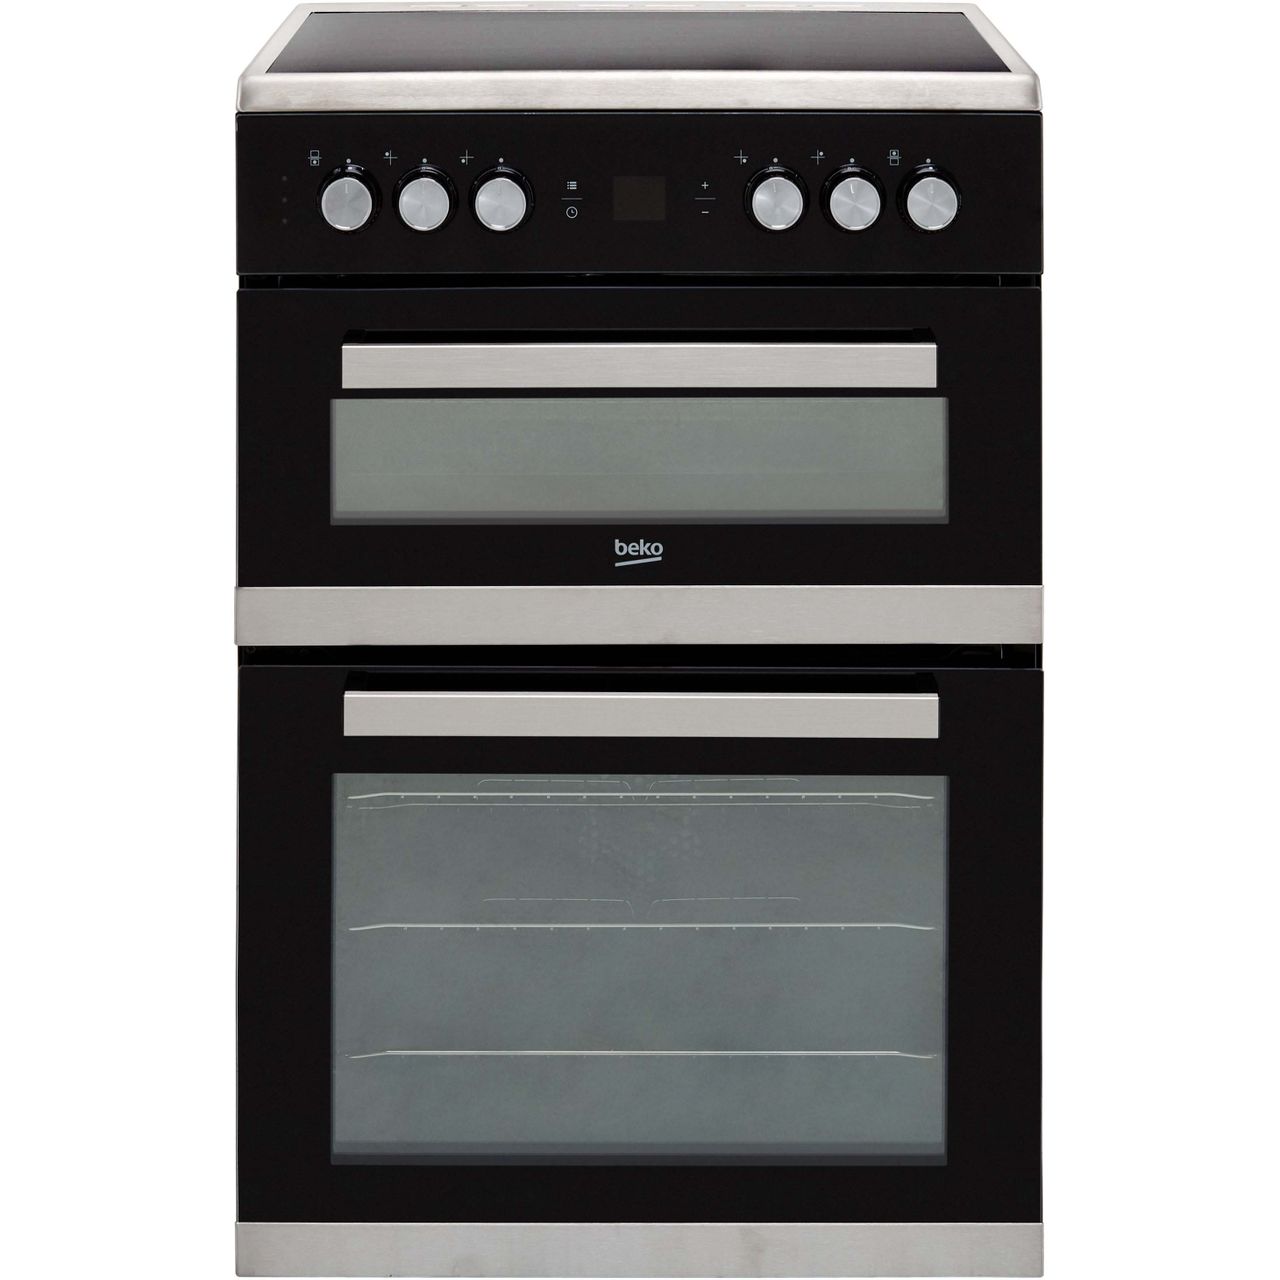 Beko JDC683X Electric Cooker with Ceramic Hob Review